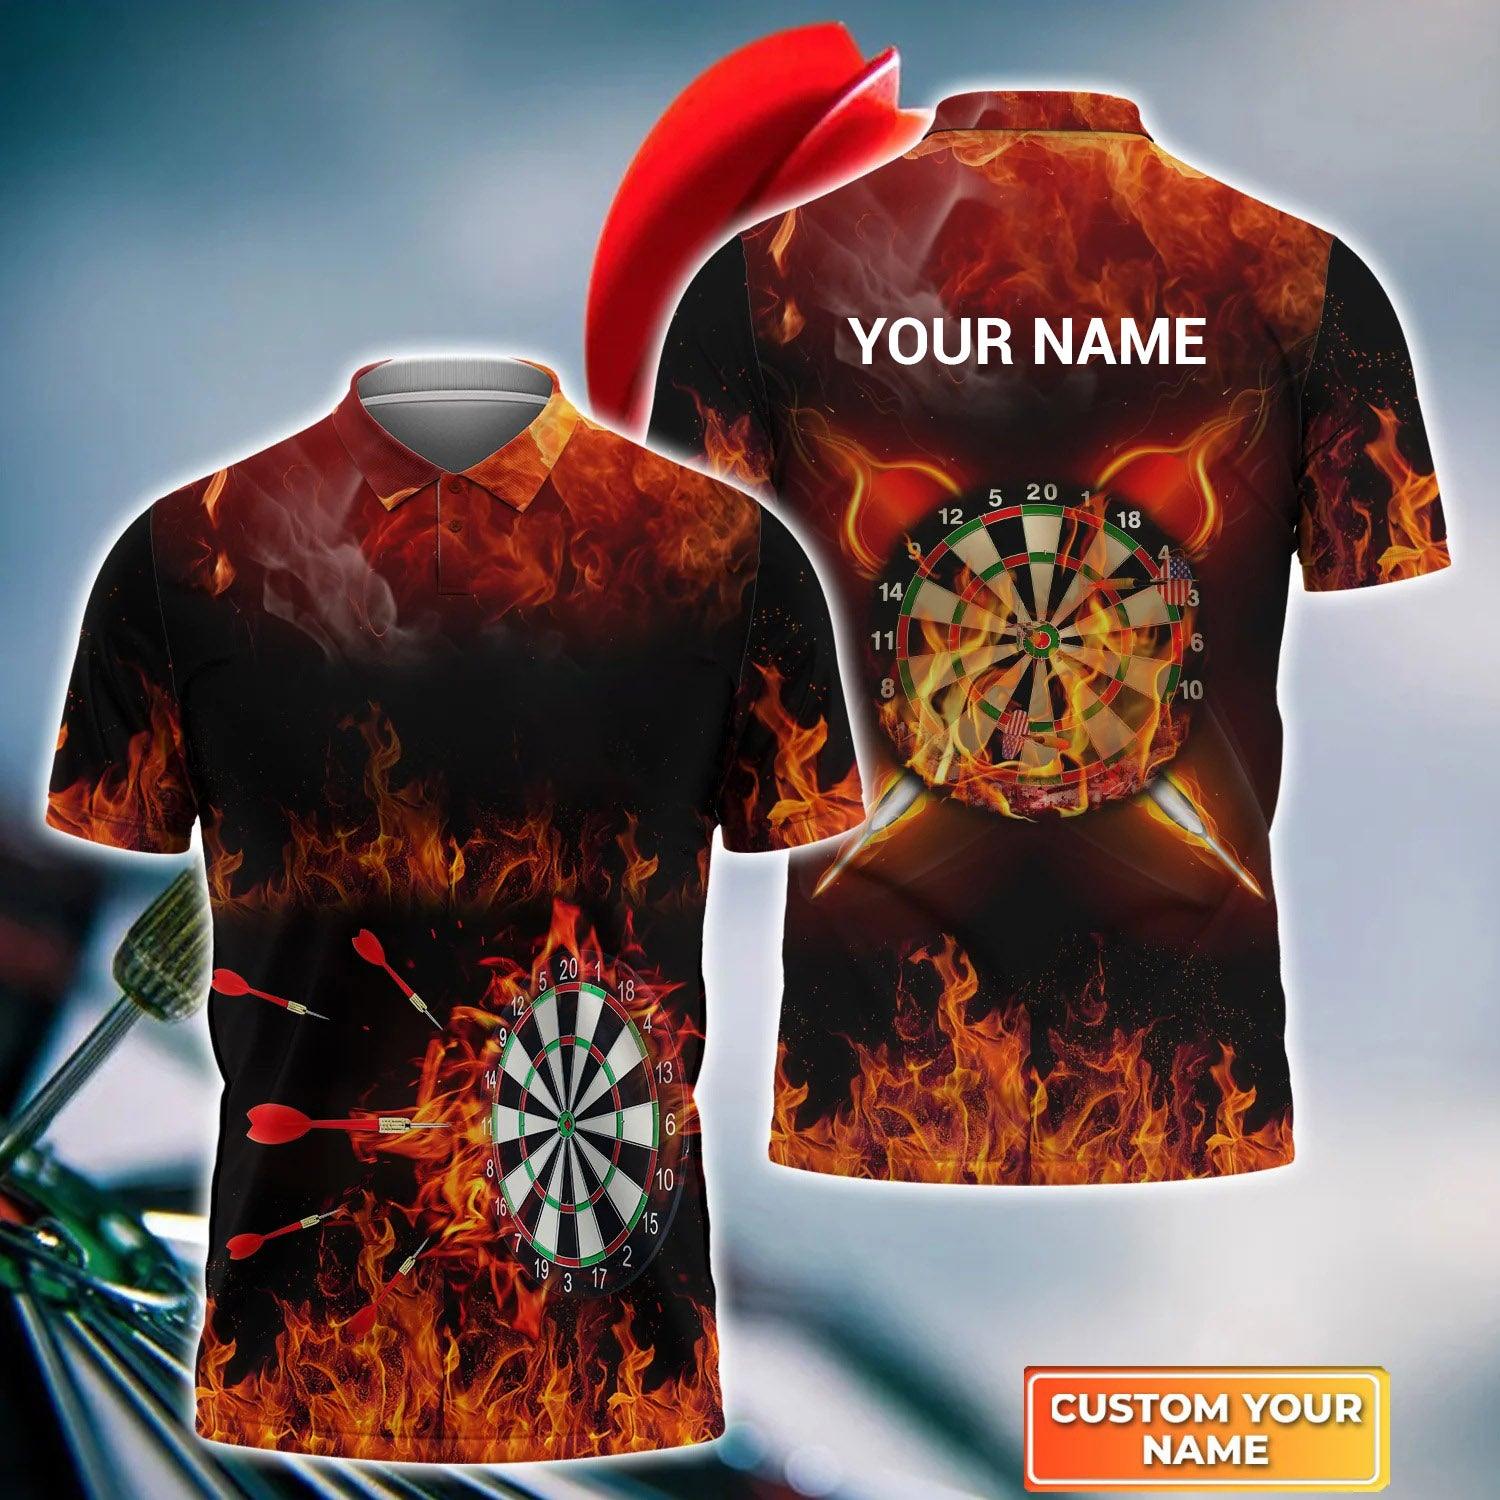 Customized Darts Polo Shirt, Darts Fire, Personalized Name Polo Shirt For Men - Perfect Gift For Darts Lovers, Darts Players - Amzanimalsgift